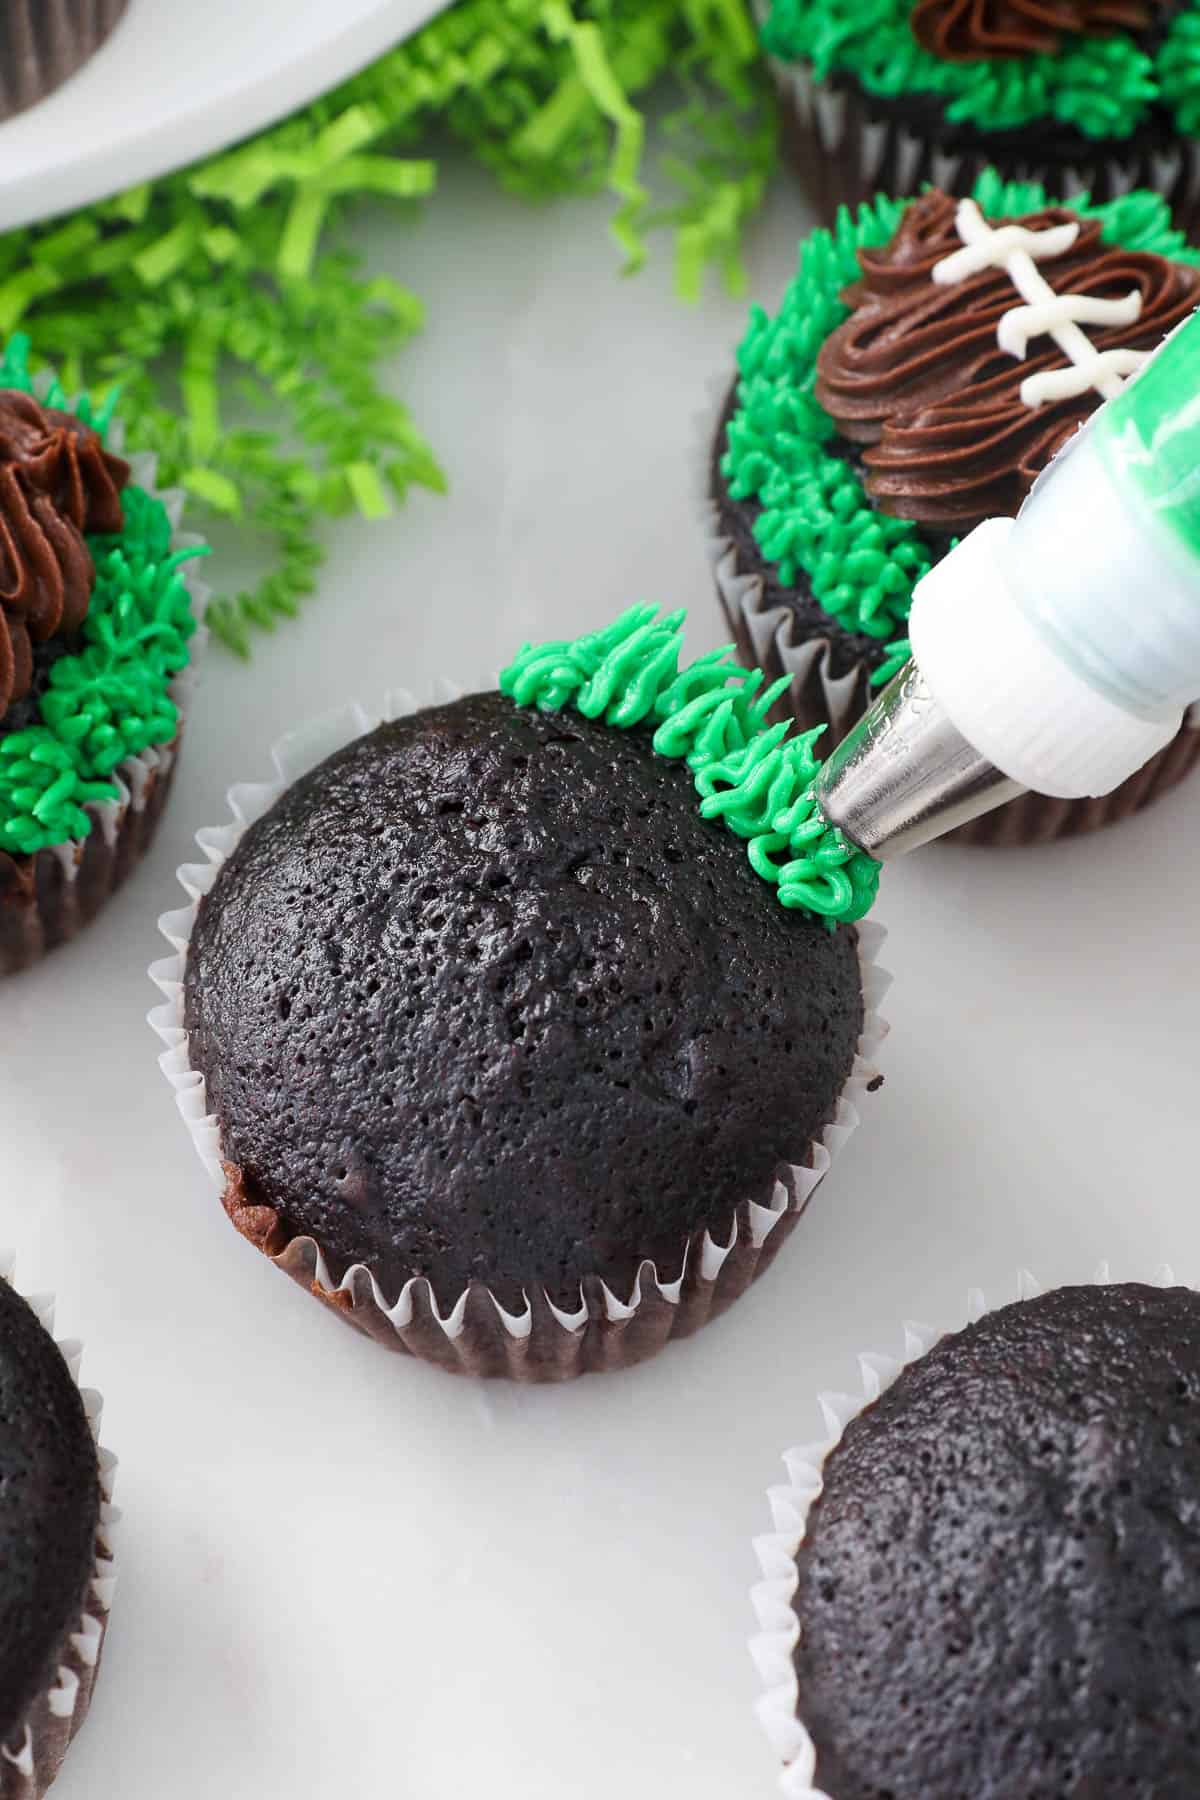 A piping tip pipes green frosting grass around the edges of a chocolate cupcake.